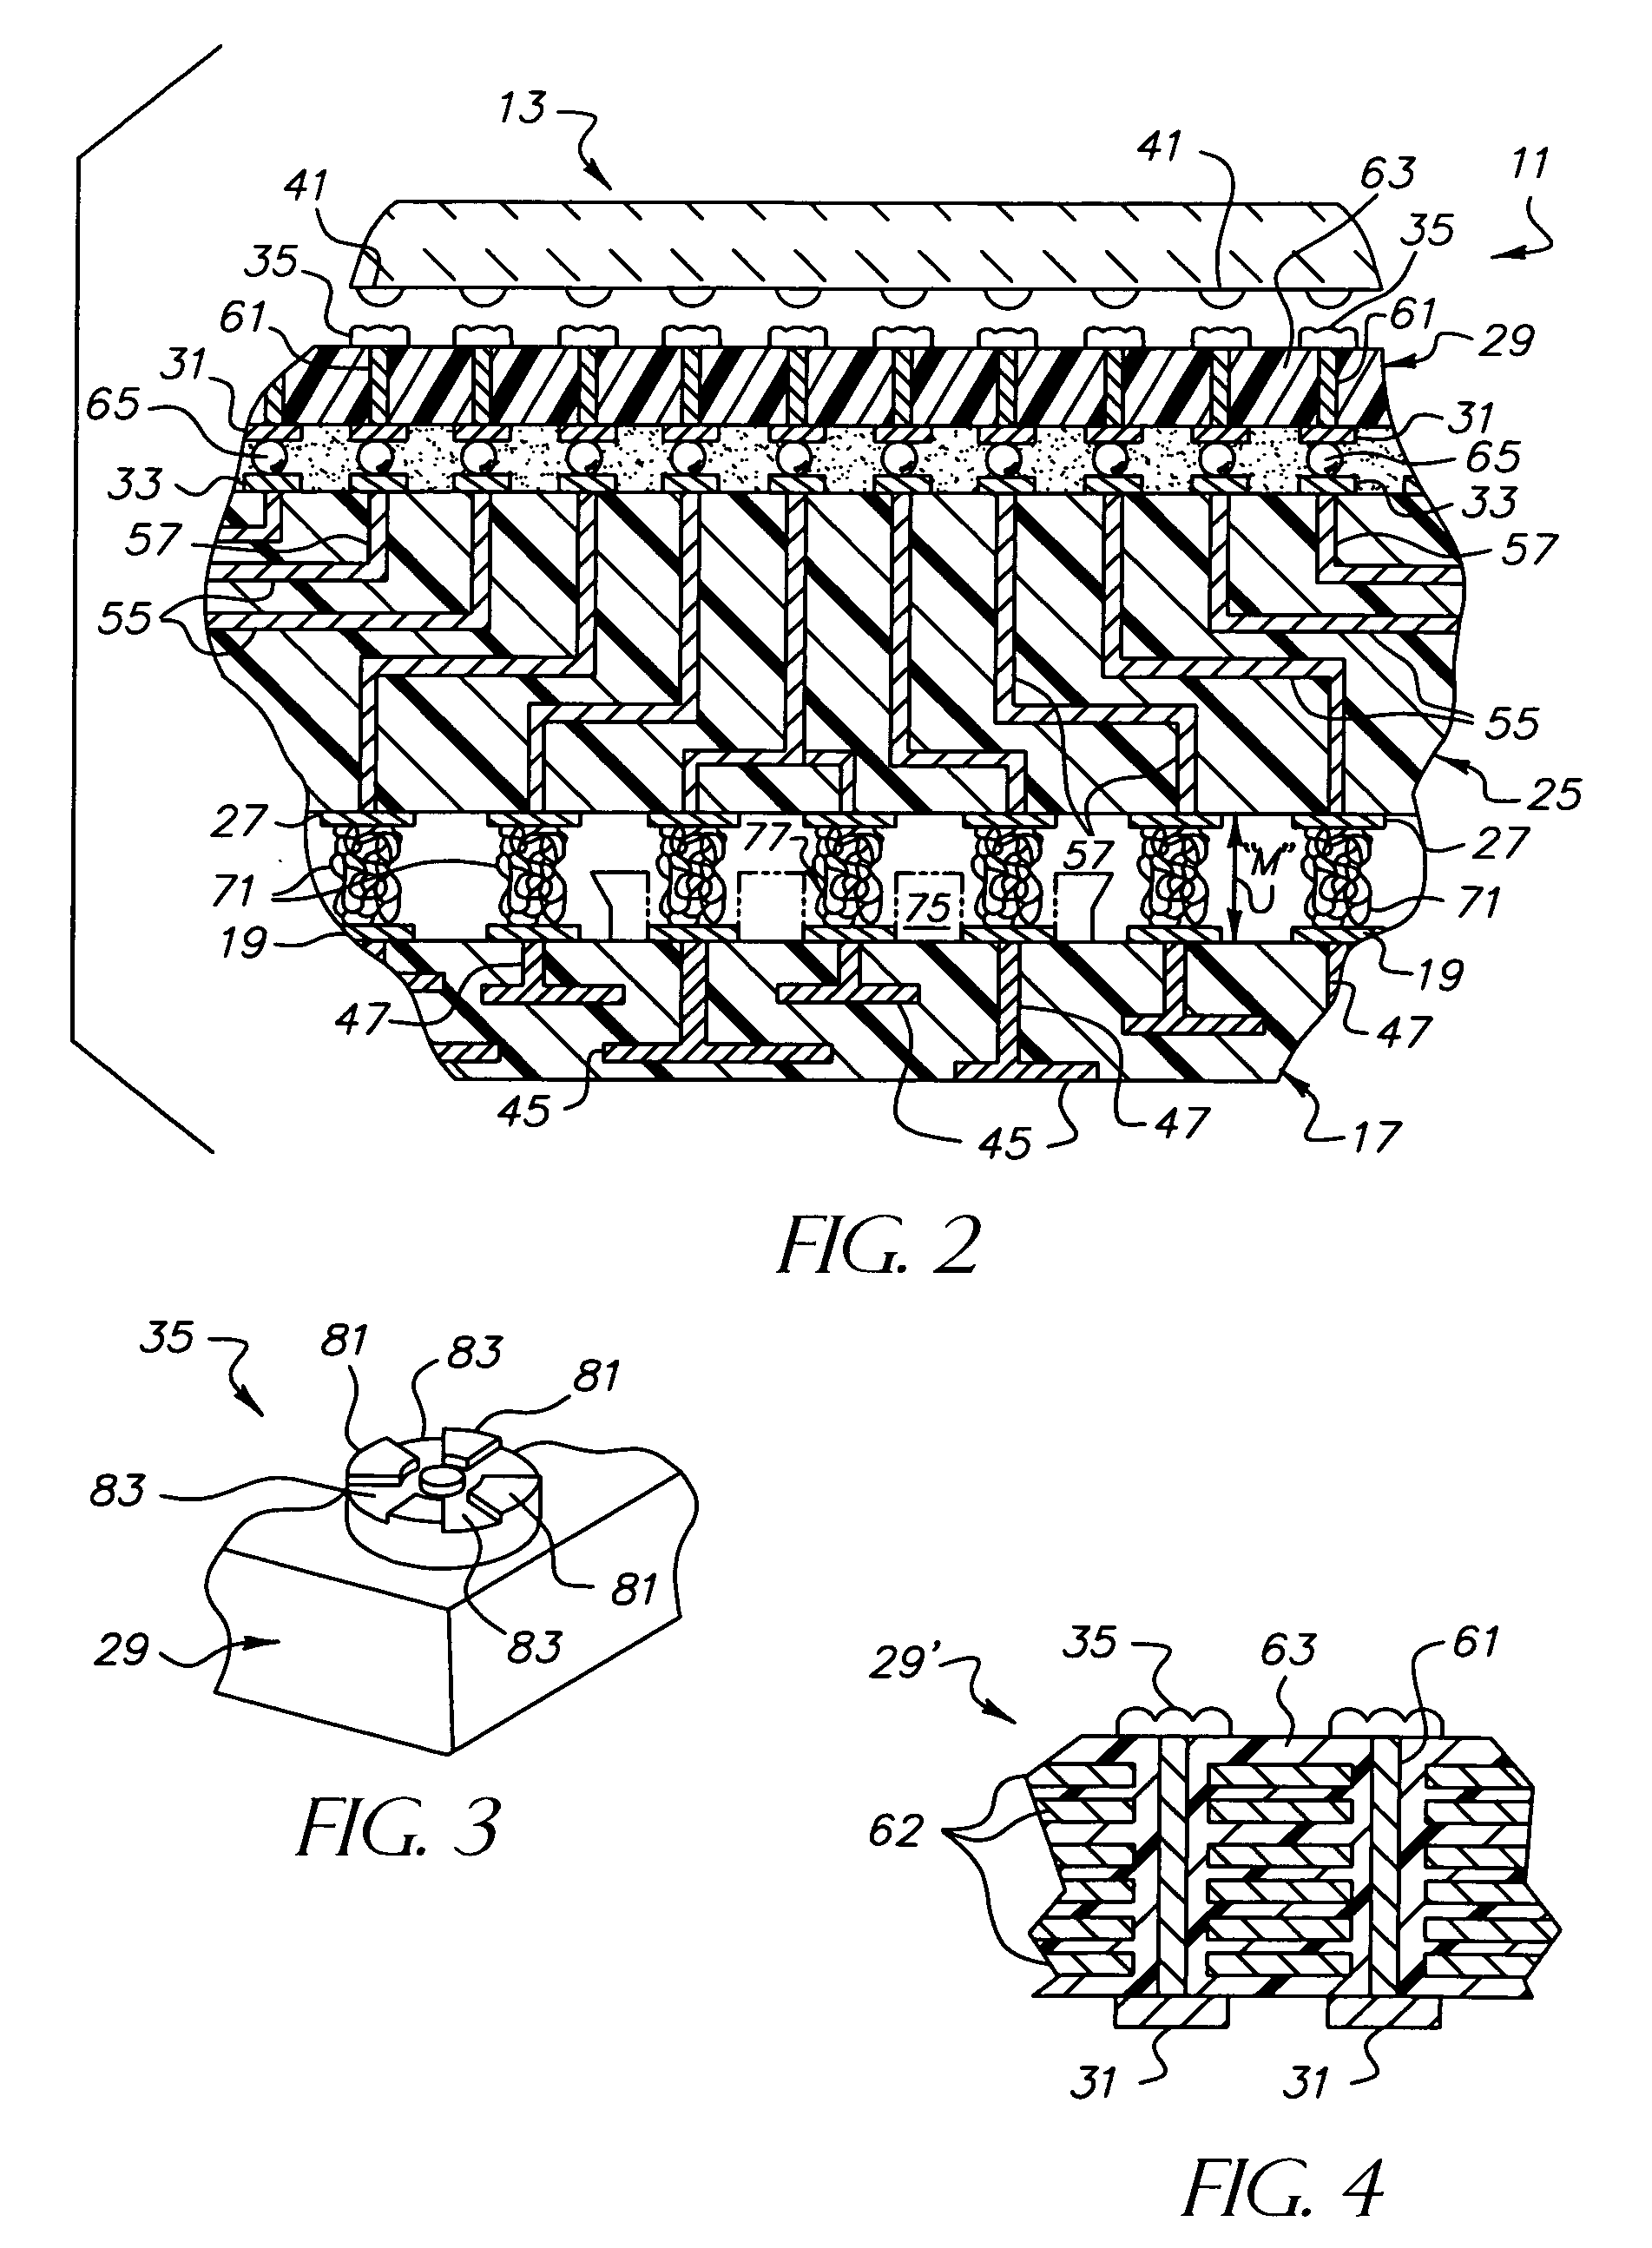 Interposer and test assembly for testing electronic devices